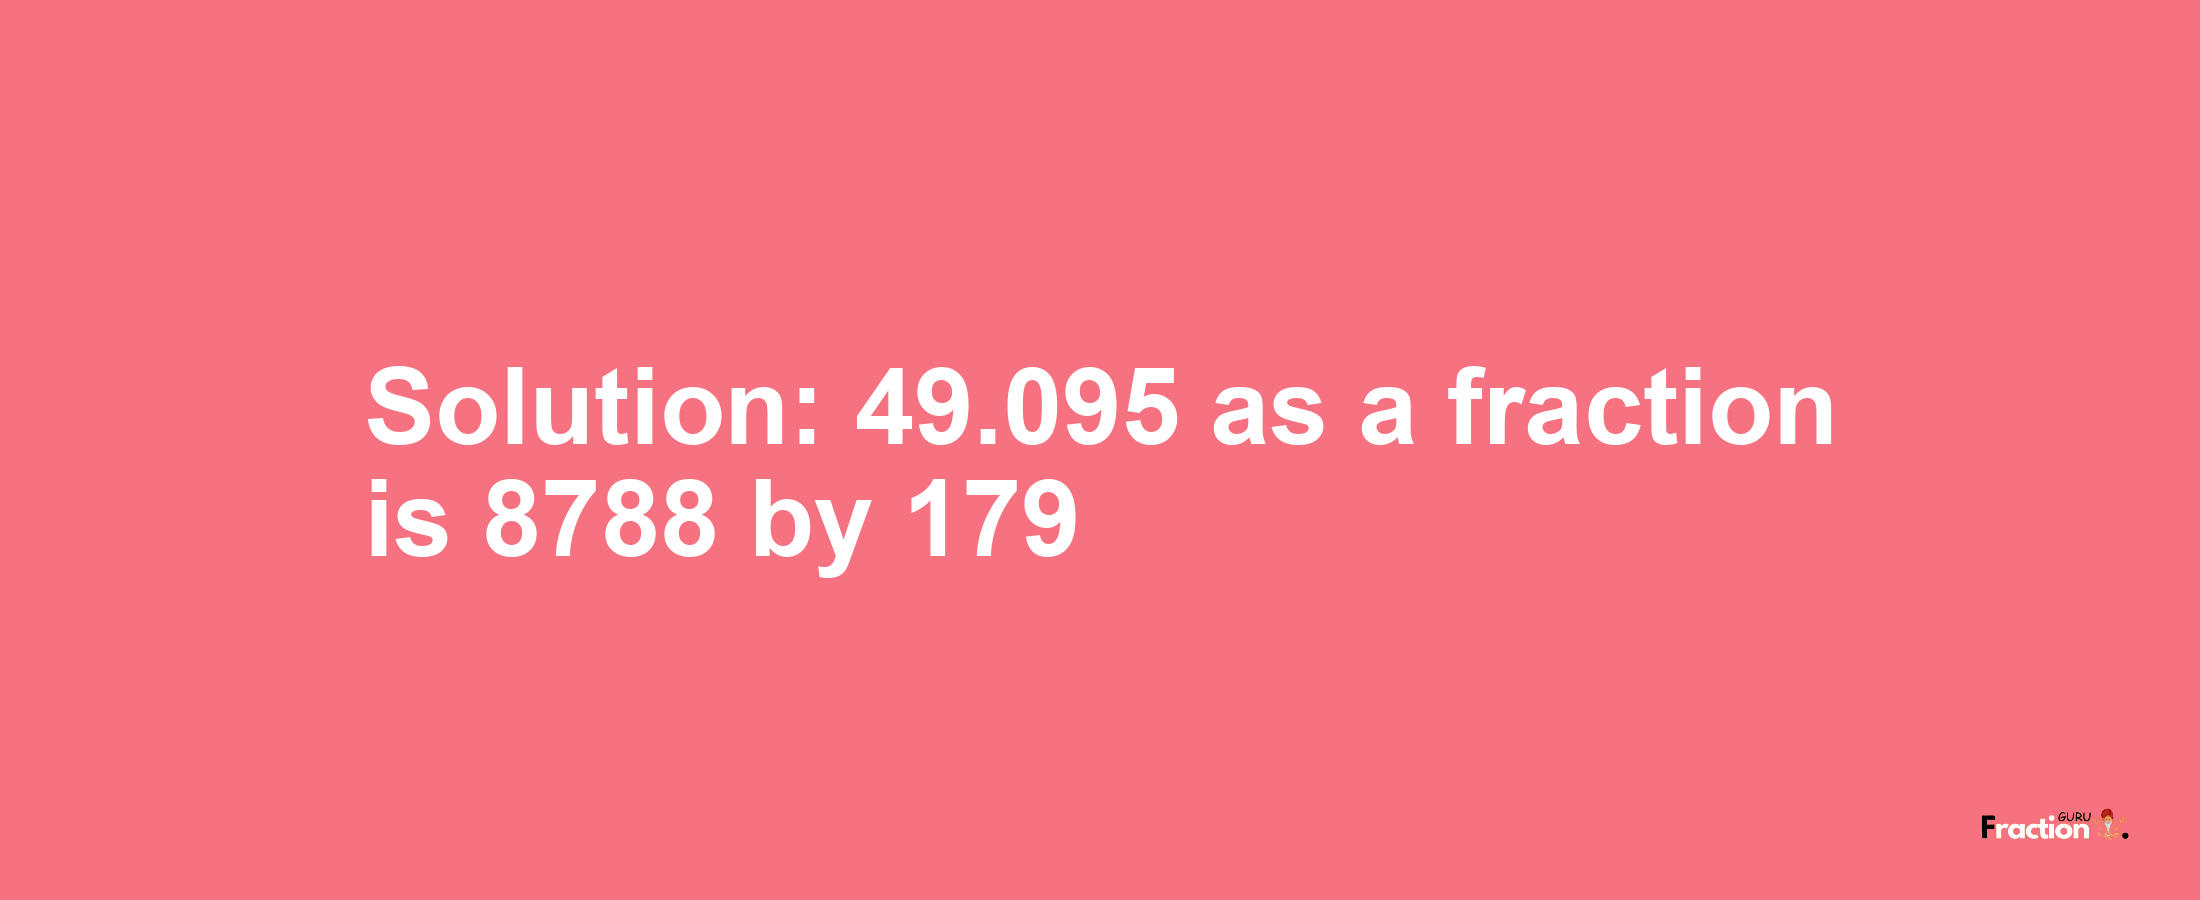 Solution:49.095 as a fraction is 8788/179